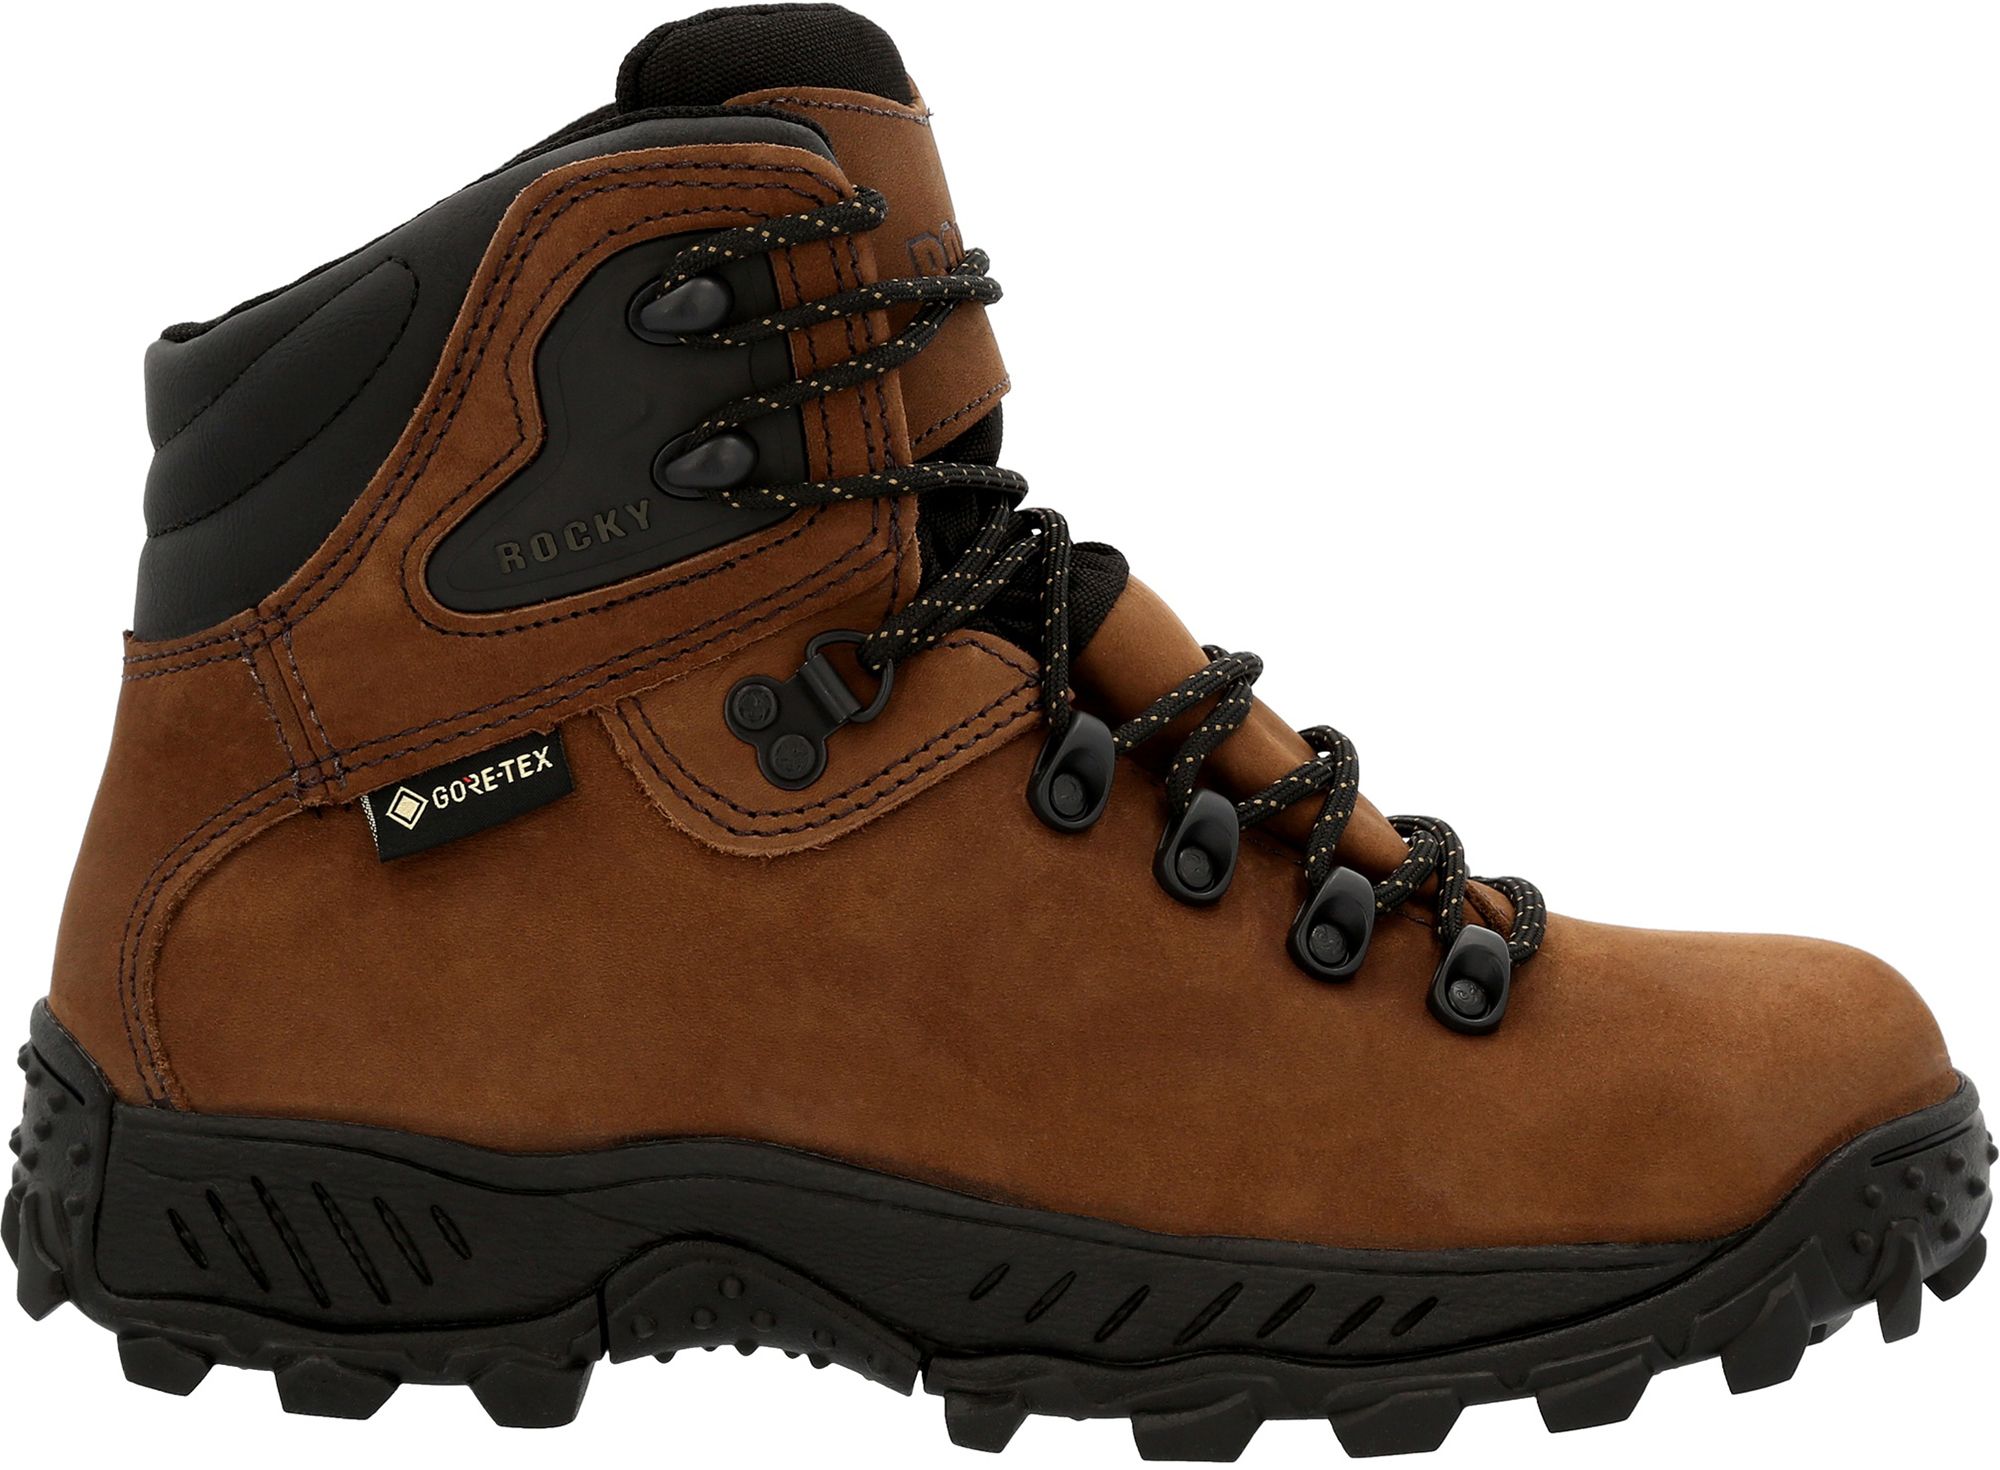 gore tex hiking boots